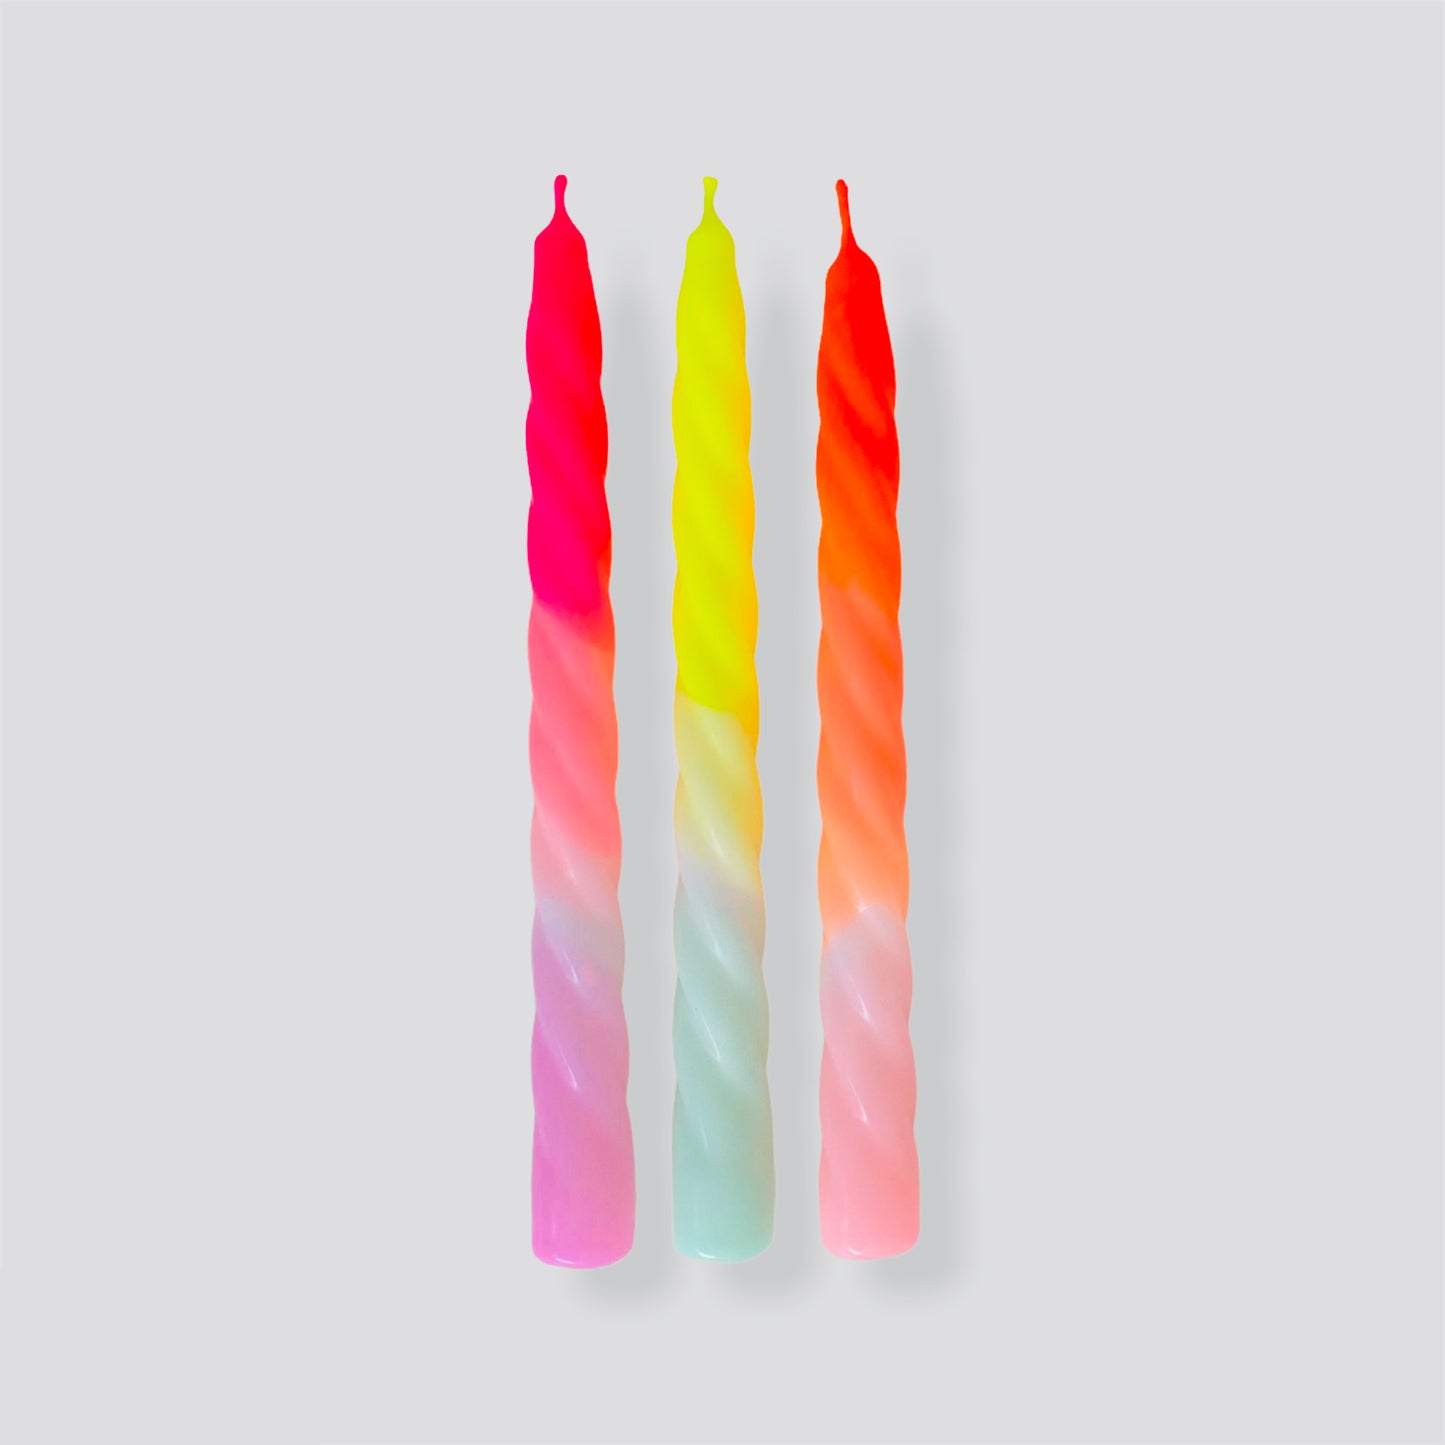 Dip Dye Twisted Candles in Shades of Fruit Salad